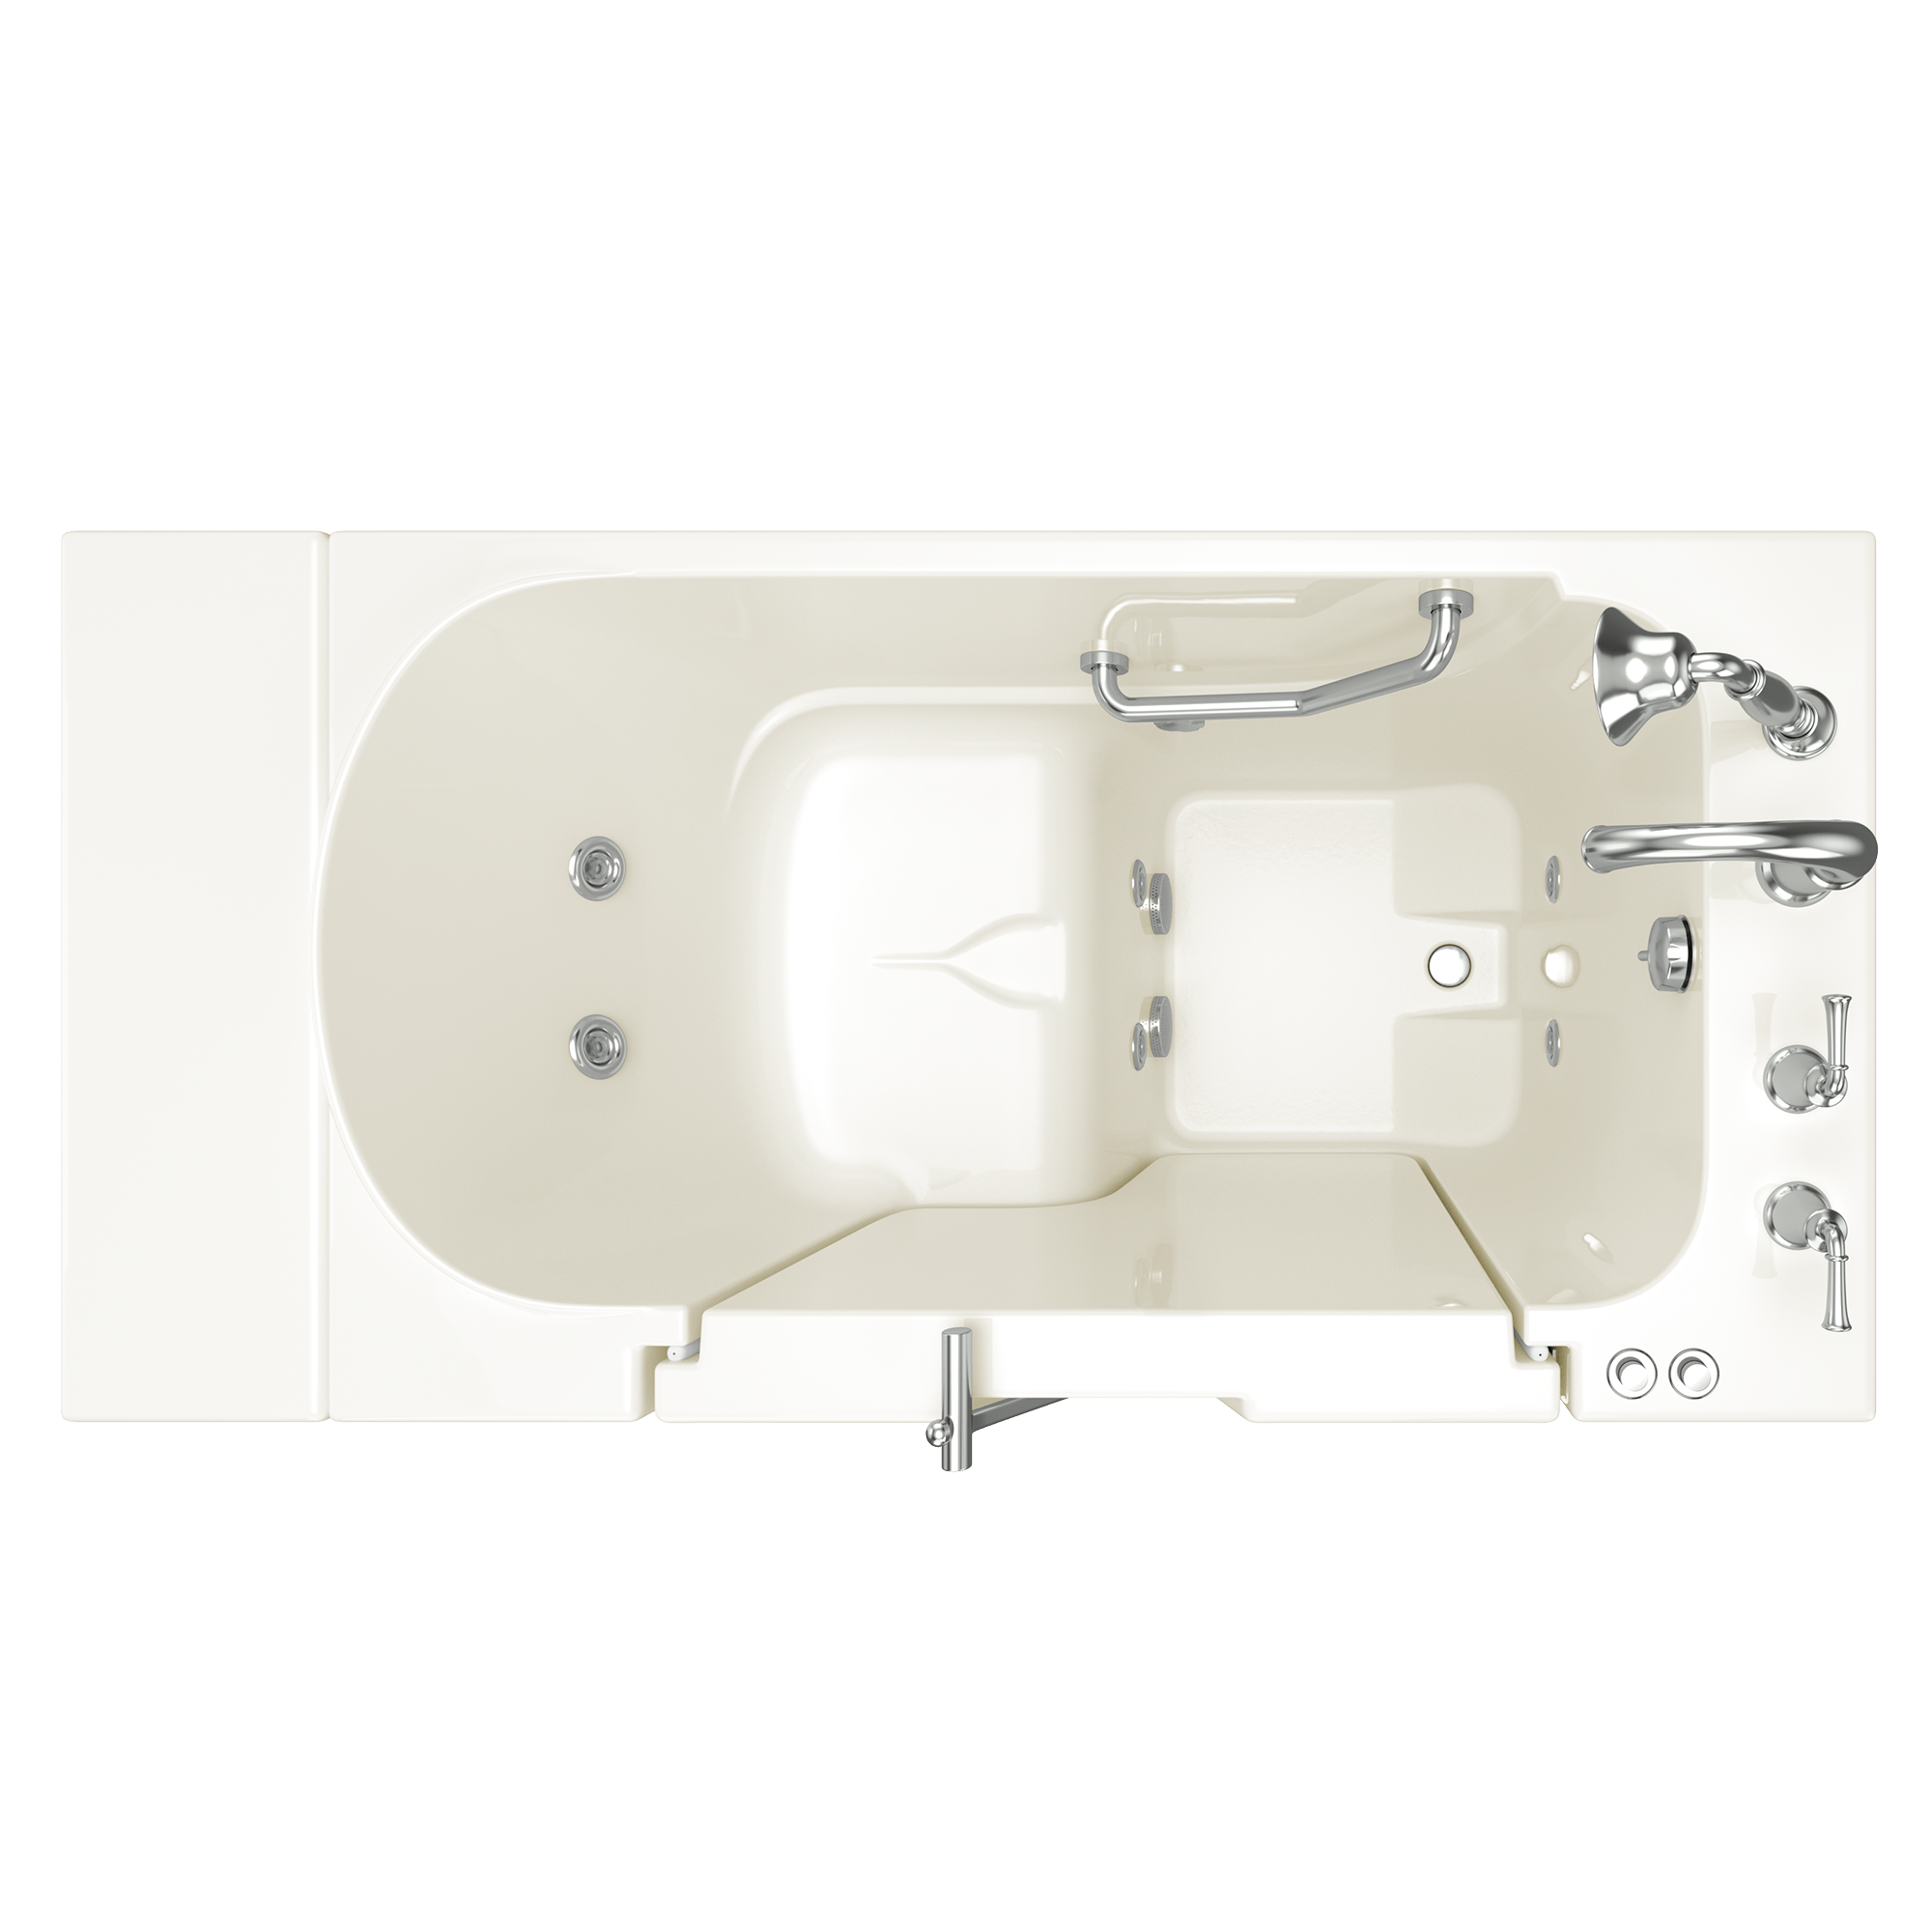 Gelcoat Value Series 30 x 52  Inch Walk in Tub With Whirlpool System   Right Hand Drain With Faucet WIB LINEN